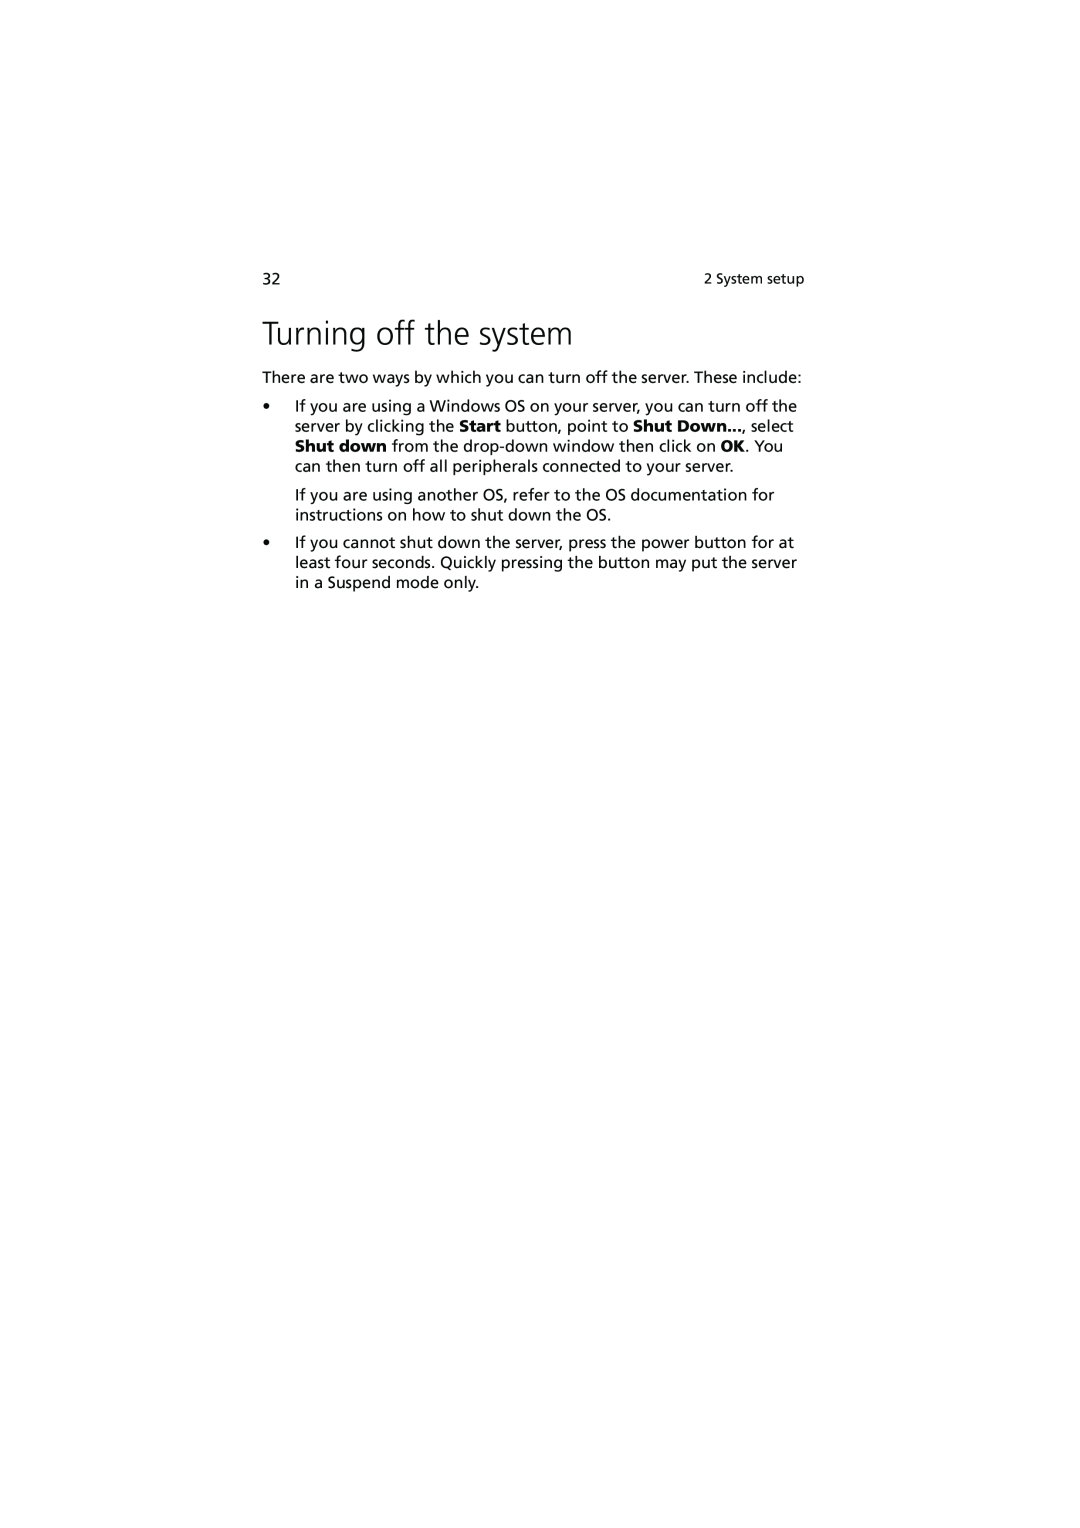 Acer R720 Series manual Turning off the system 